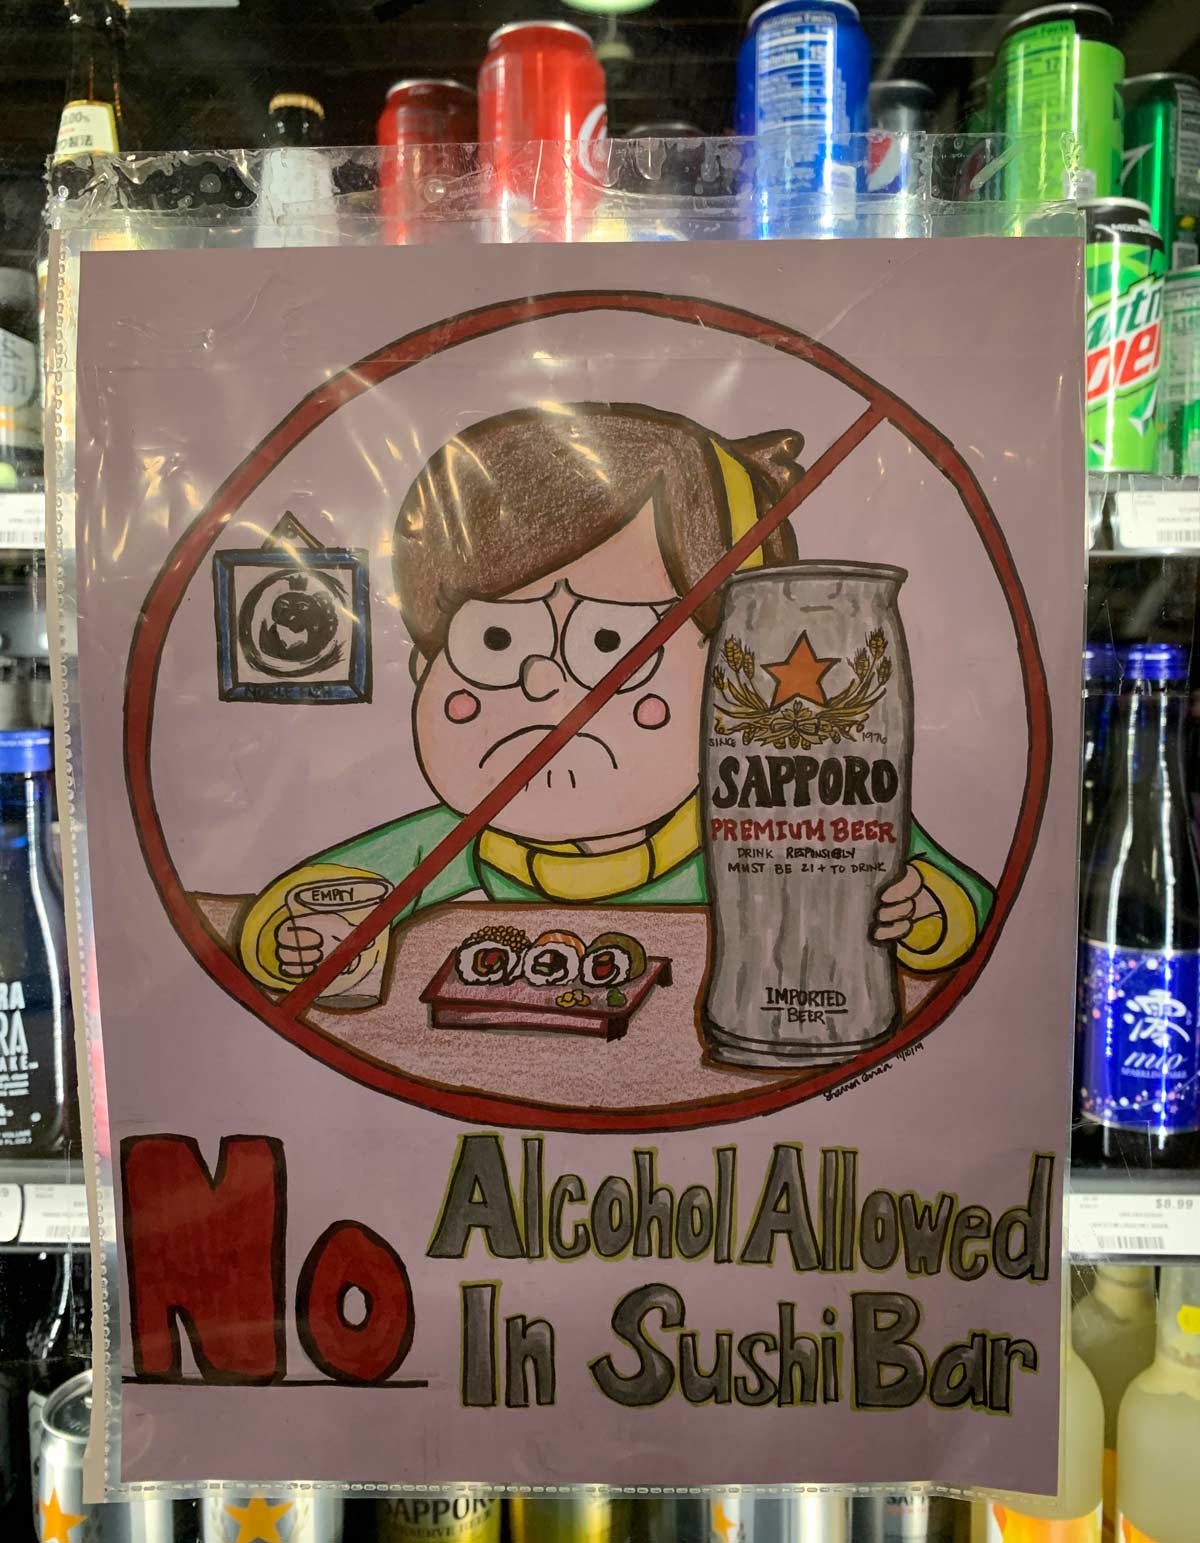 No Alcohol Allowed In Sushi Bar